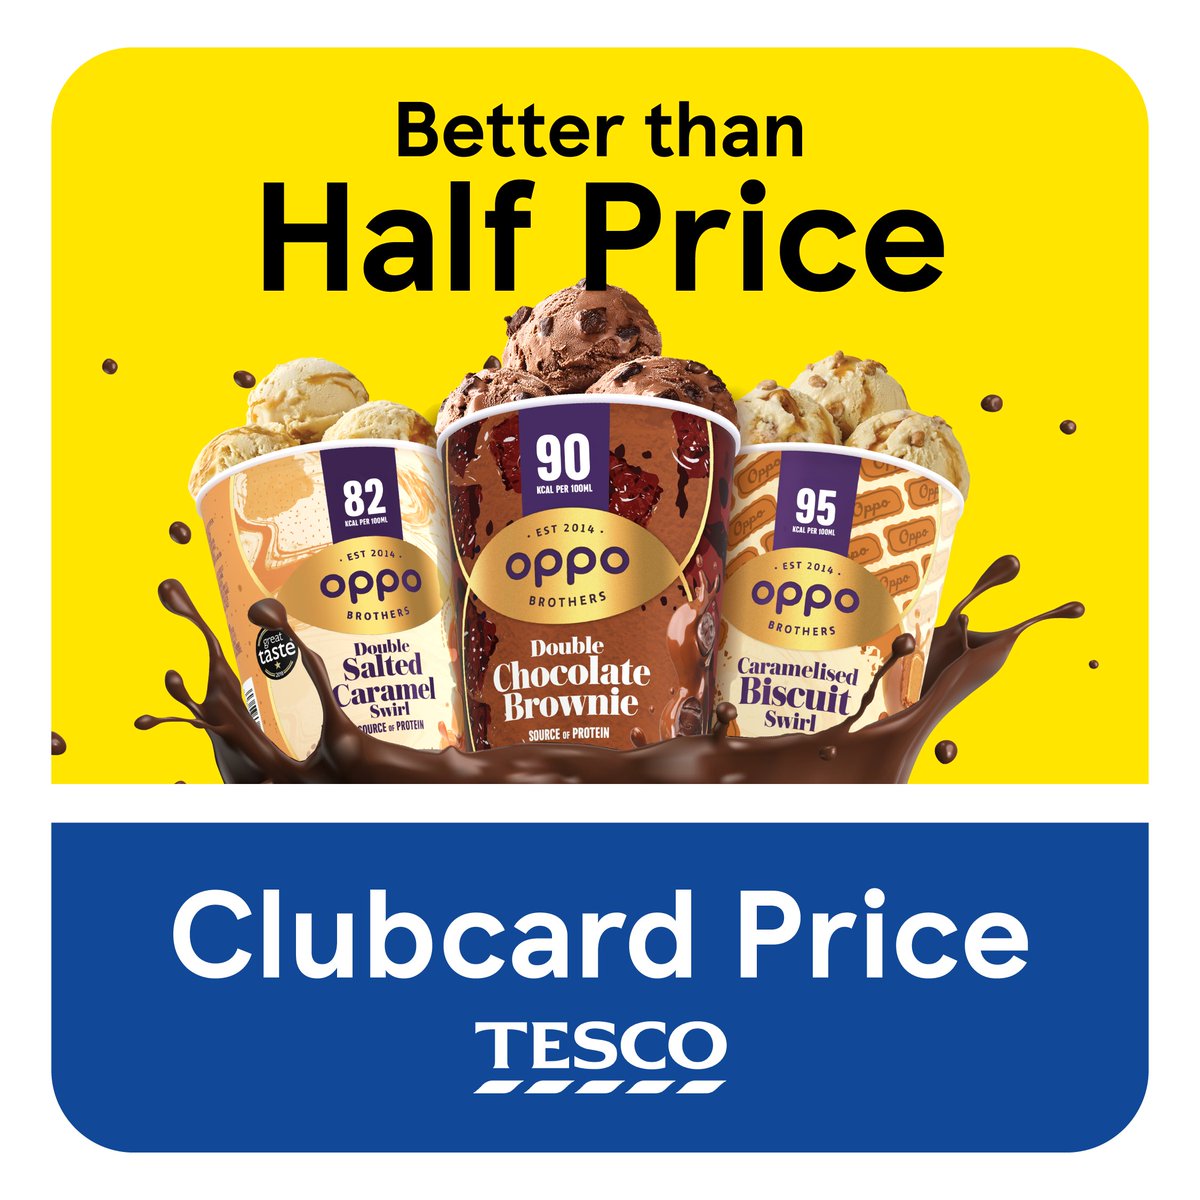 🚨 WAS £5.20 - NOW £2.50 EACH 🚨 for the next 3 weeks (now until 20th May), all our tasty tubs are BETTER THAN HALF PRICE at @Tesco ☀🎉 life's too short not to treat yourself well so head to Tesco to take advantage of this VERY special offer and #IndulgeInLife with Oppo! 🍦😎